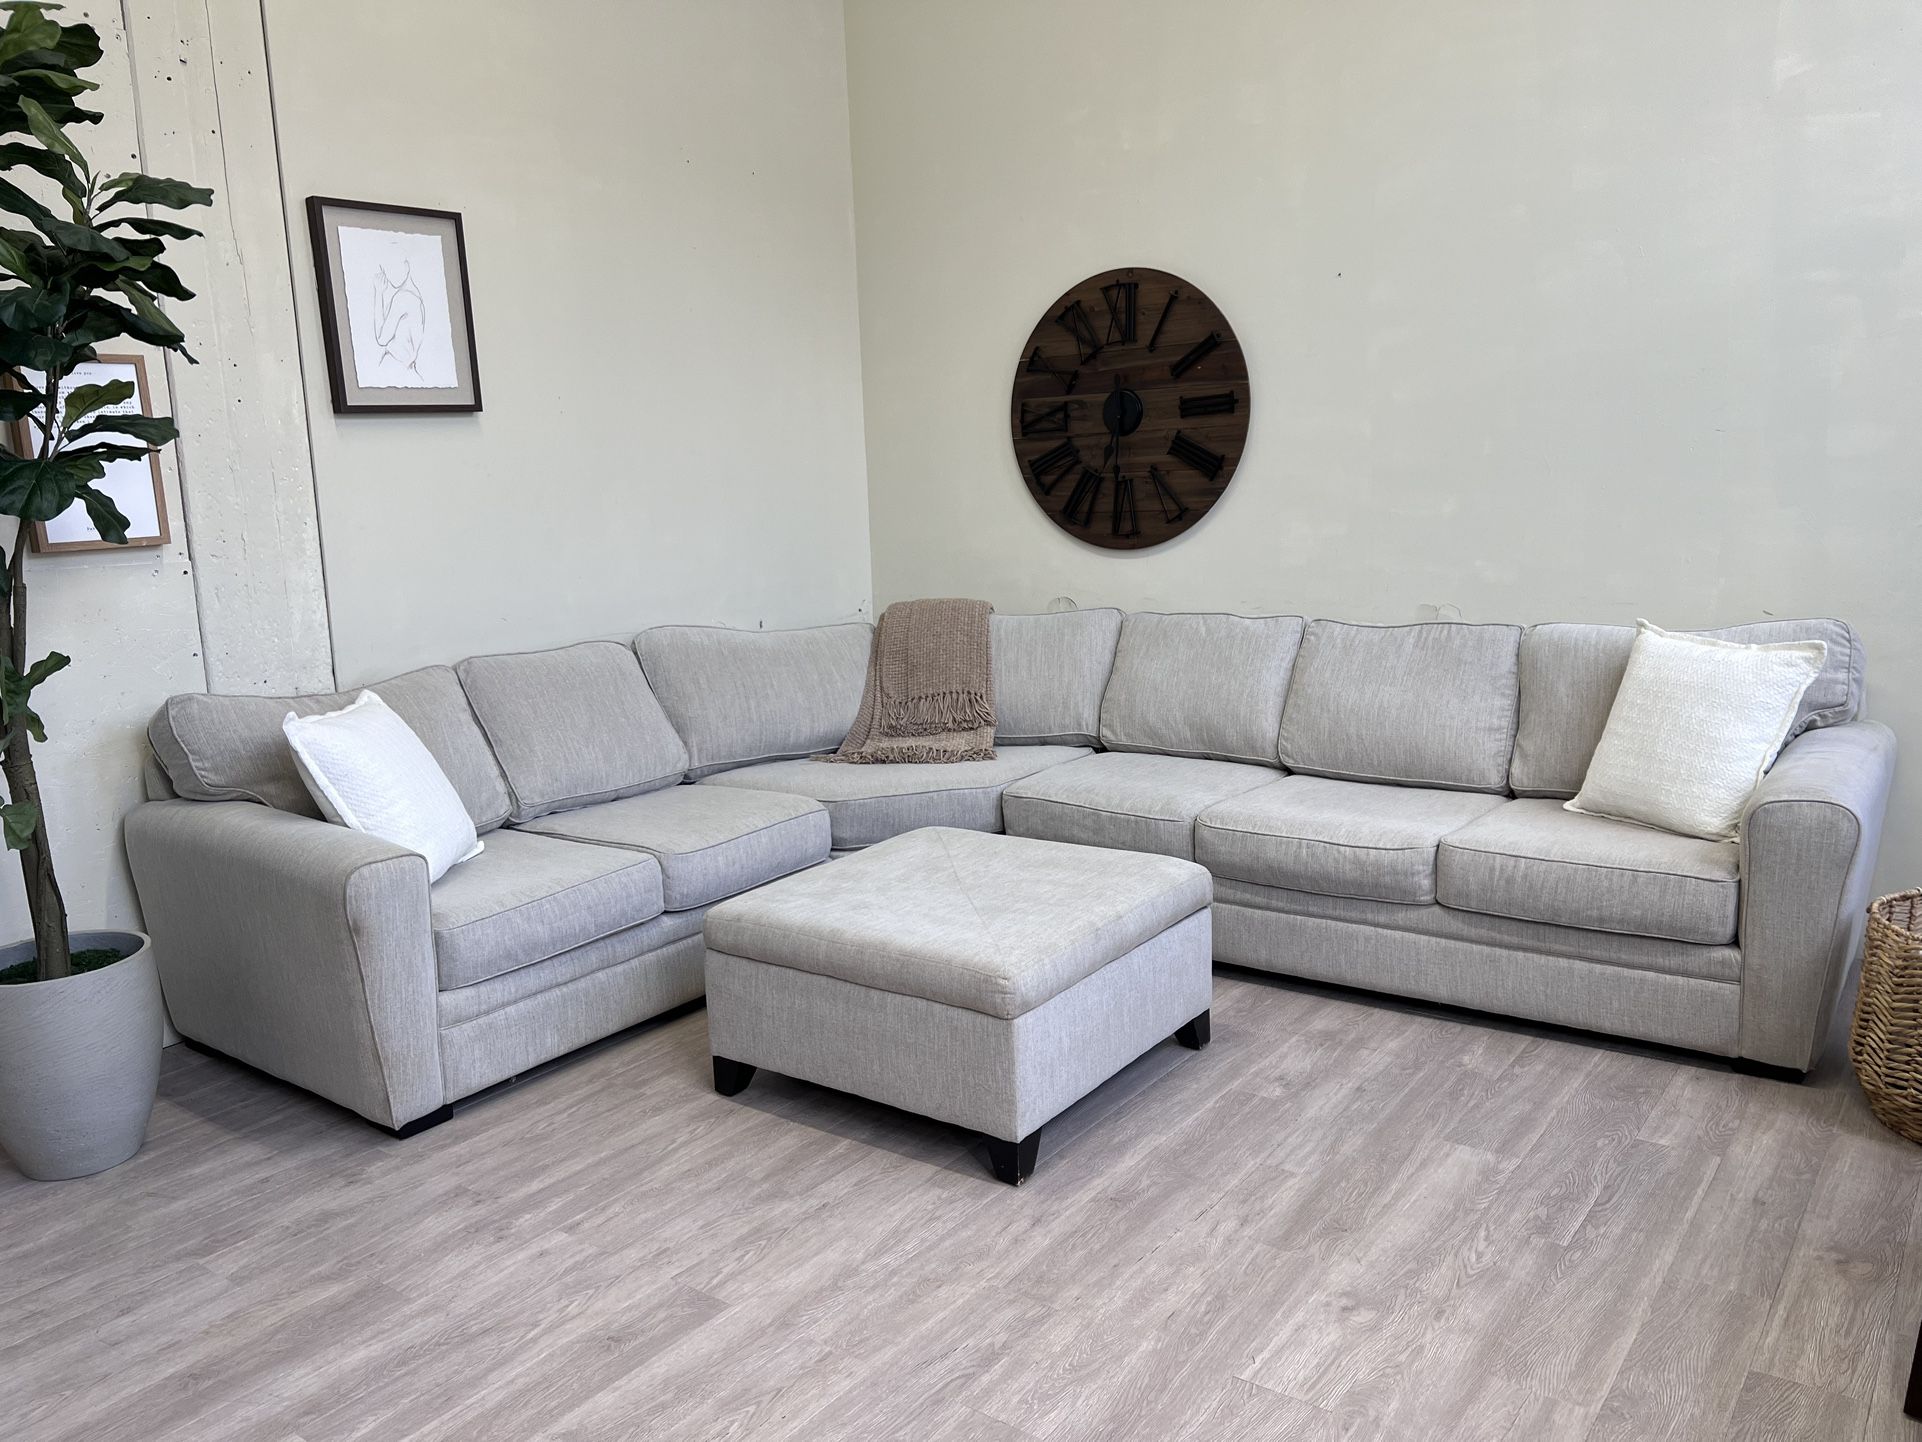 FREE DELIVERY! 🚚 - Eggshell White Modern Sectional Couch with Storage Ottoman